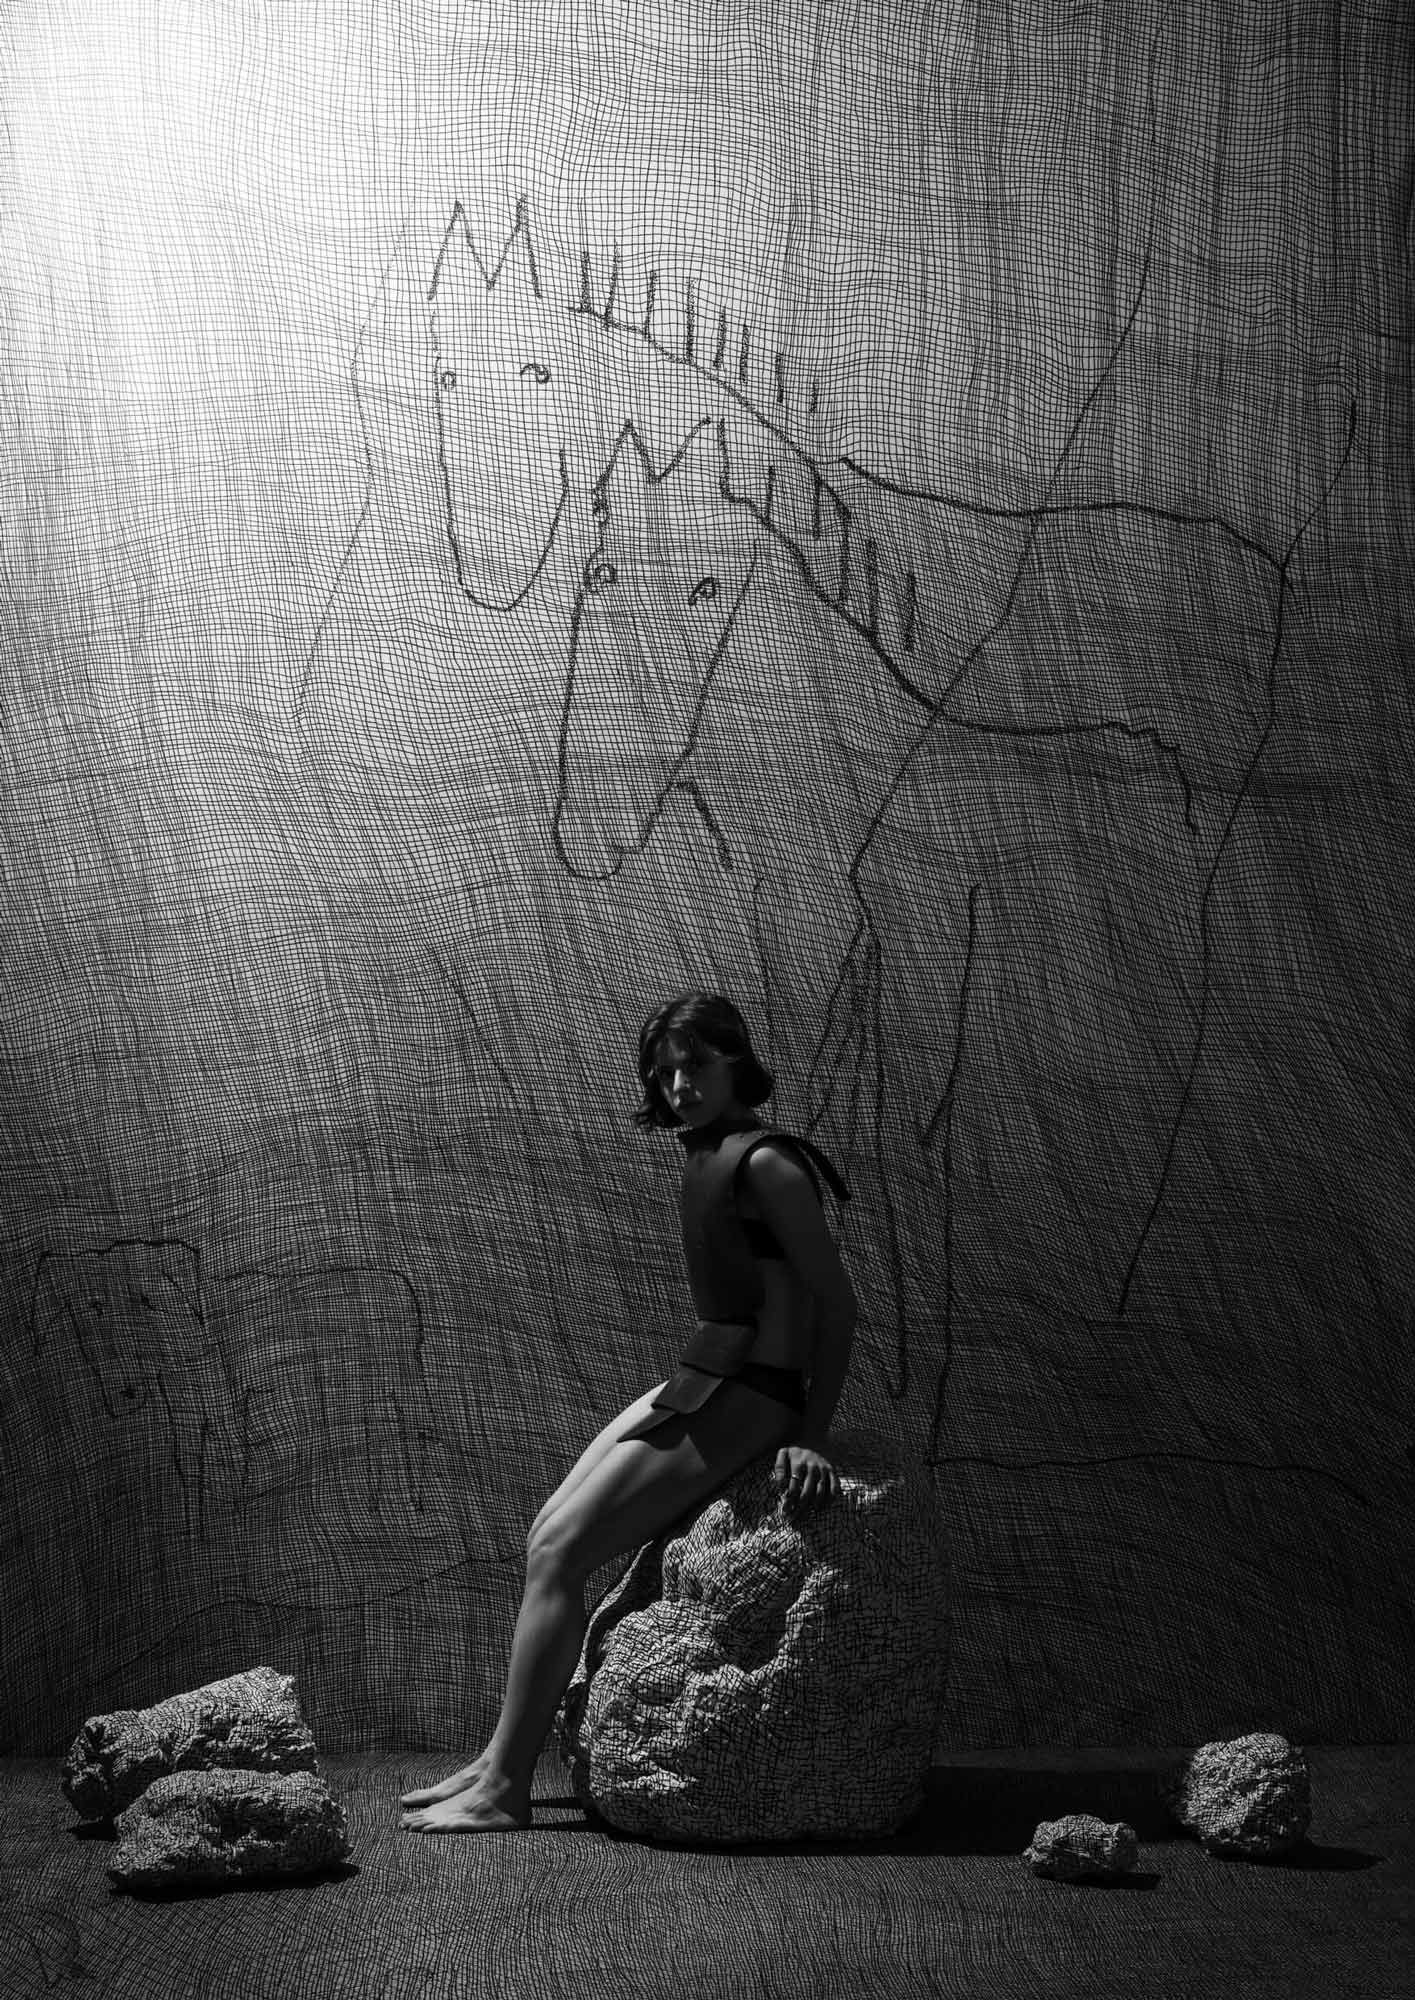 In a platinum print, a woman in armor-like attire sits on a boulder, illuminated from above, near an etched dual-horse mural.